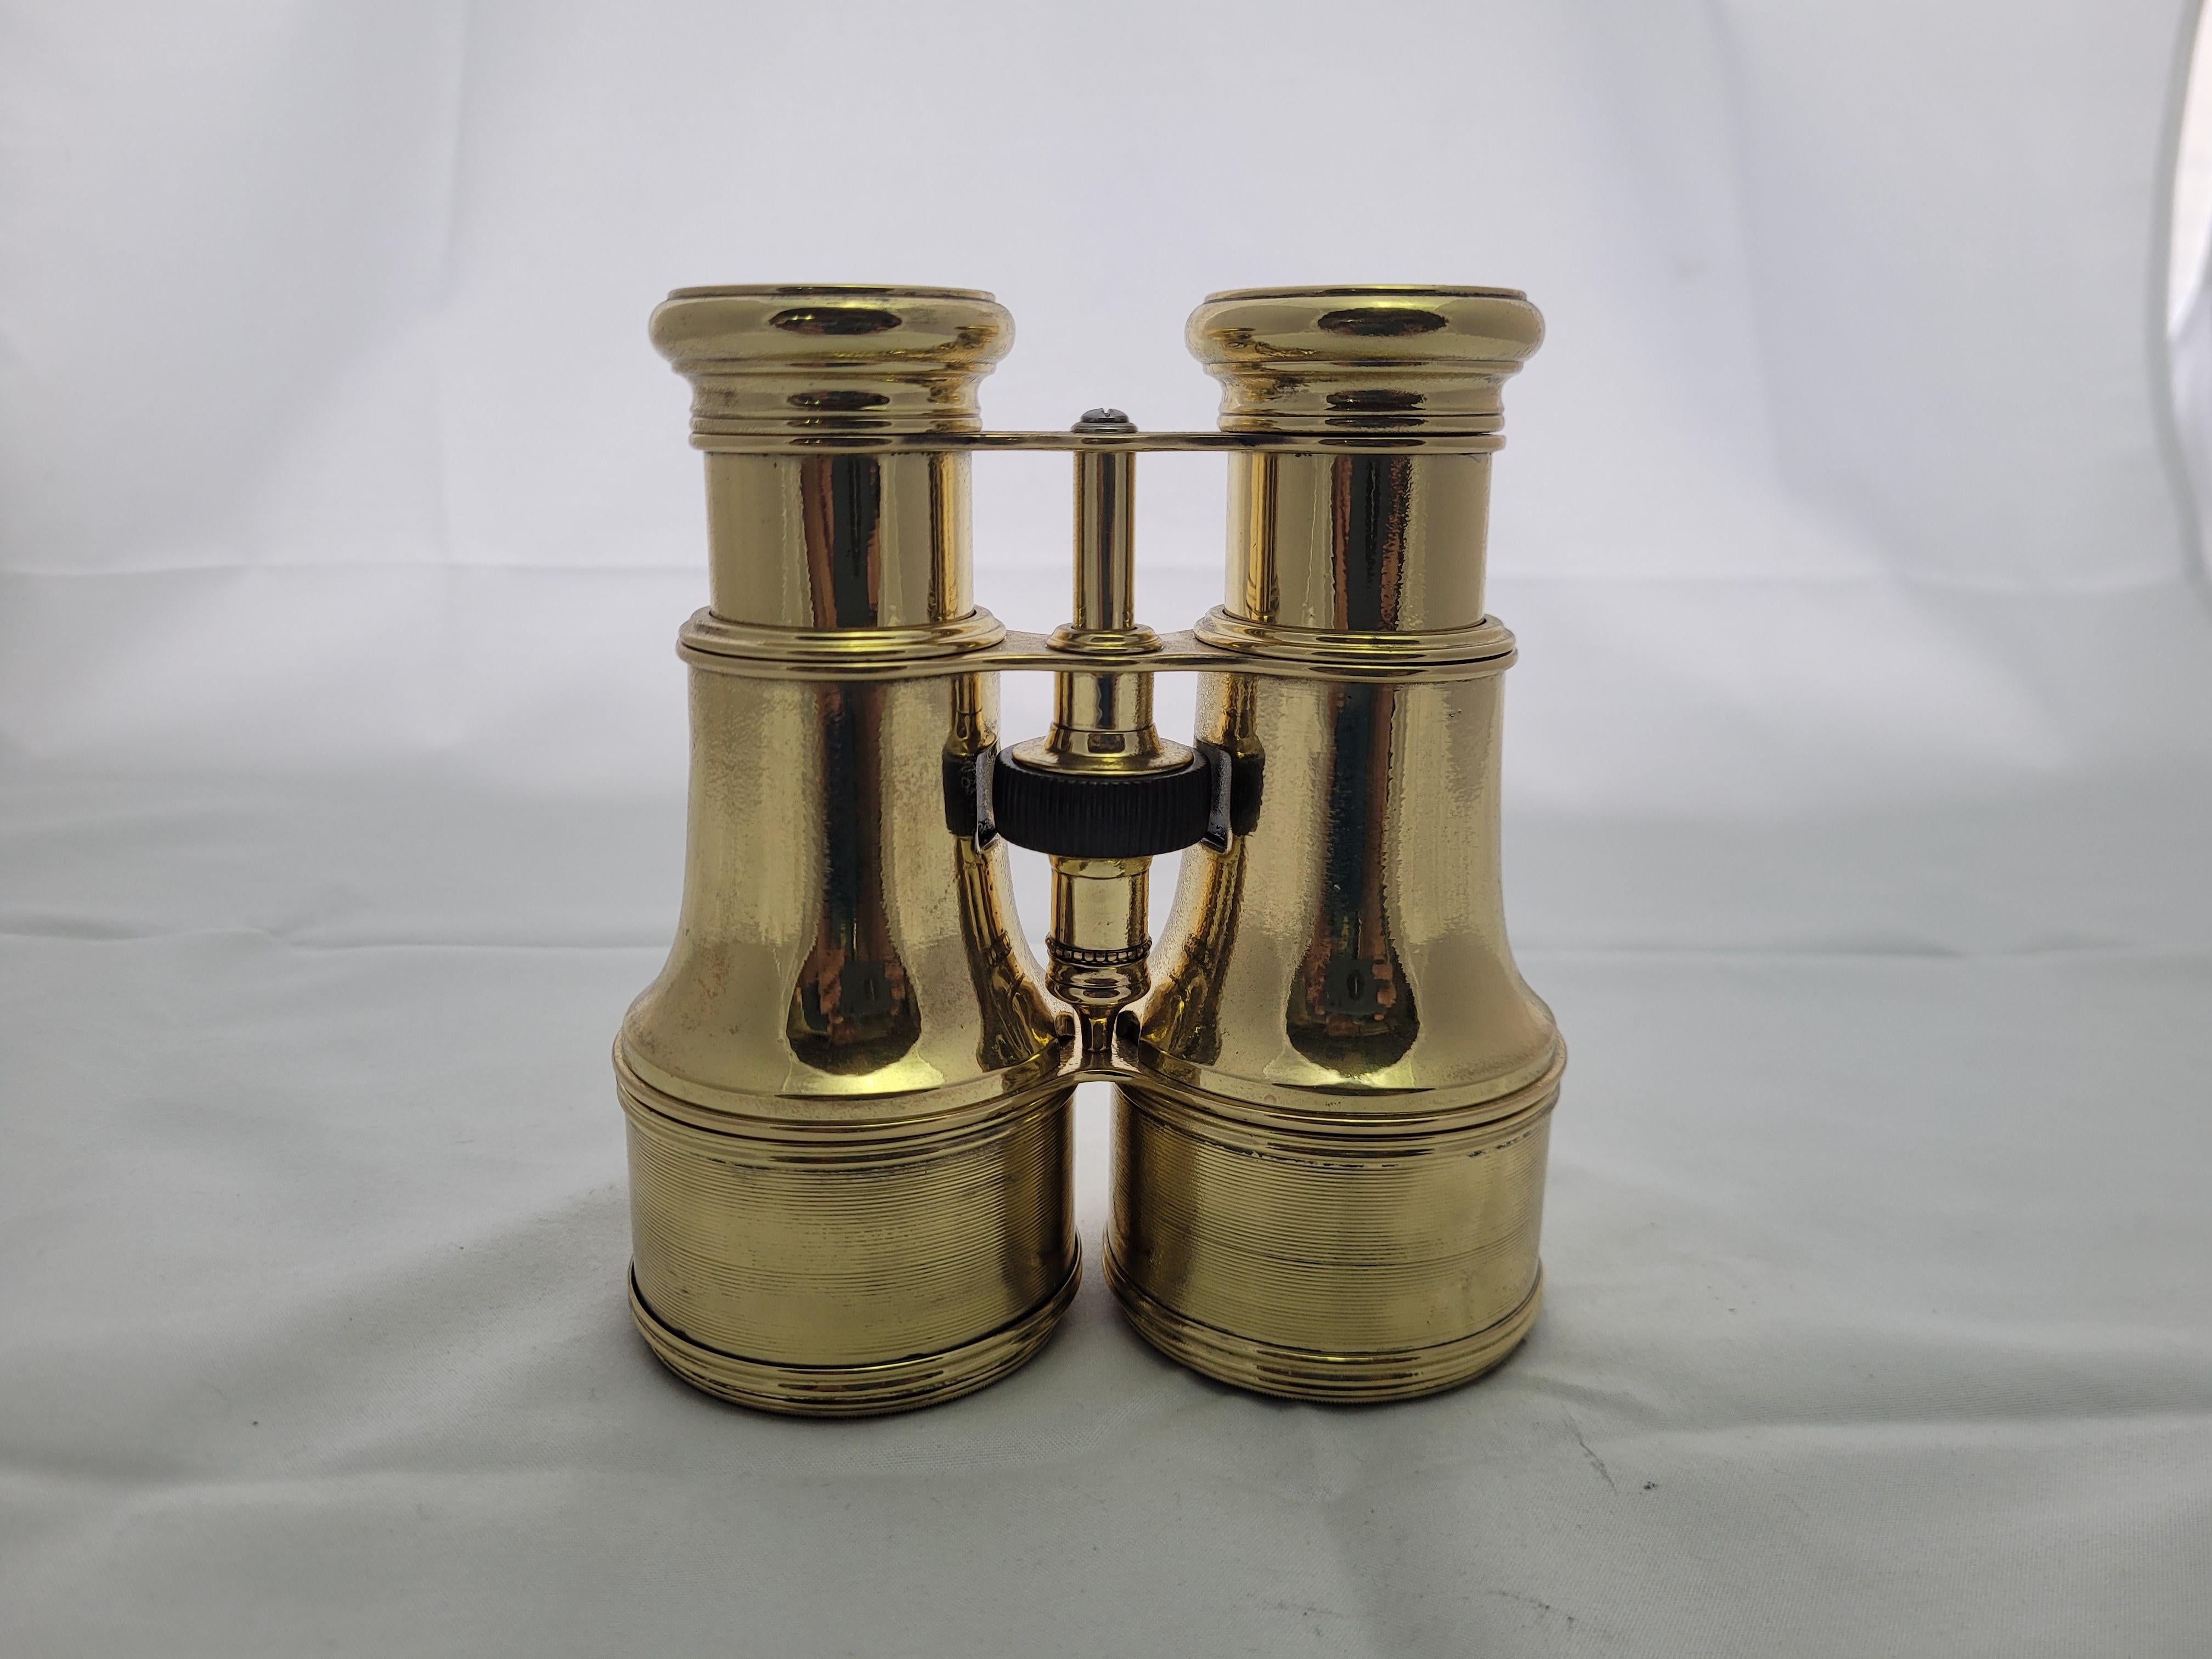 A meticulously polished and lacquered brass binocular with geared focal knob, sunshades, etc.

The eye pieces are marked 